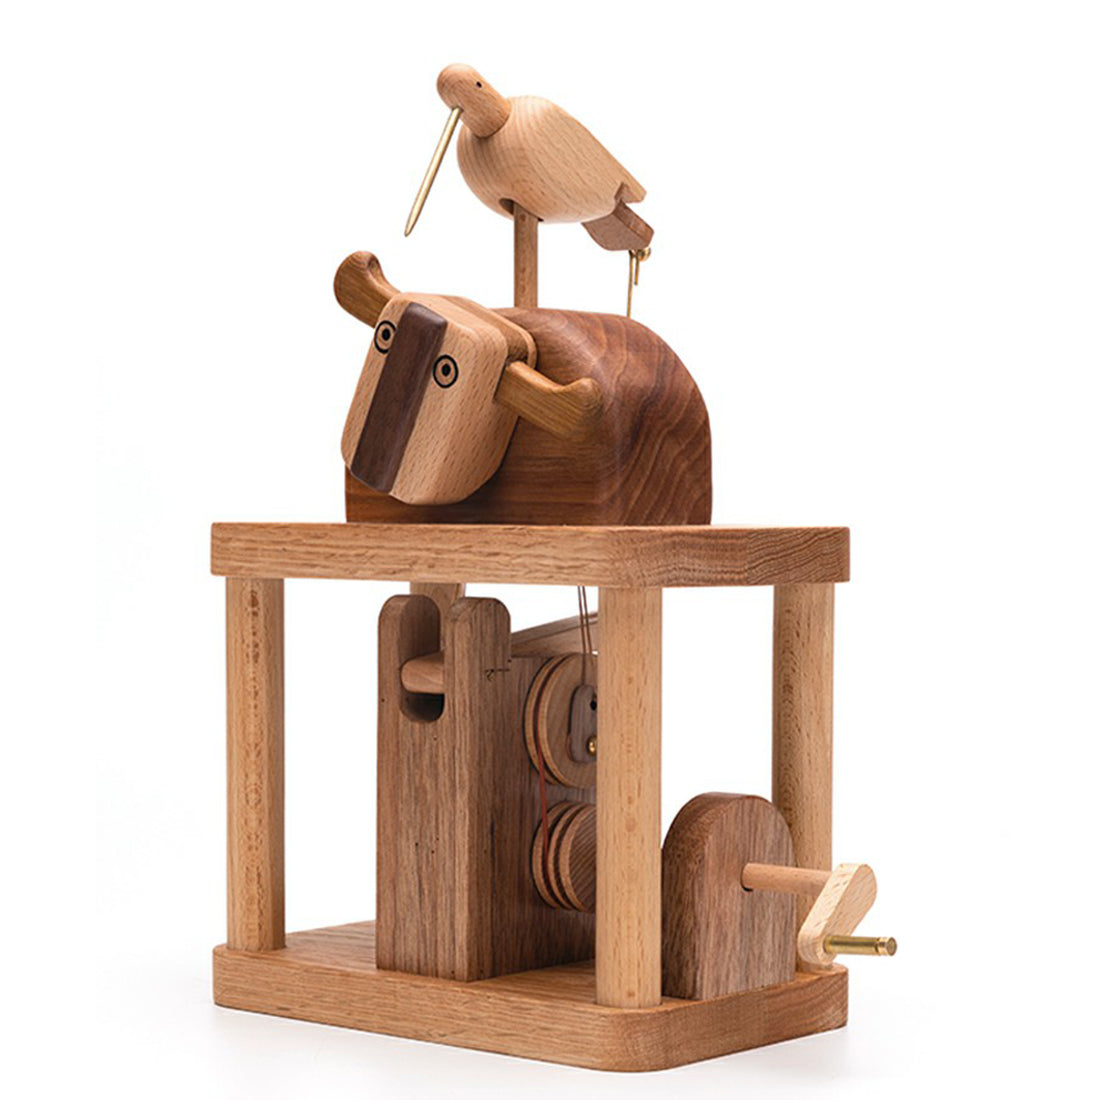 Automata Cute Animal Music Box Wooden Cow and Bird Musical Box for Home Decor